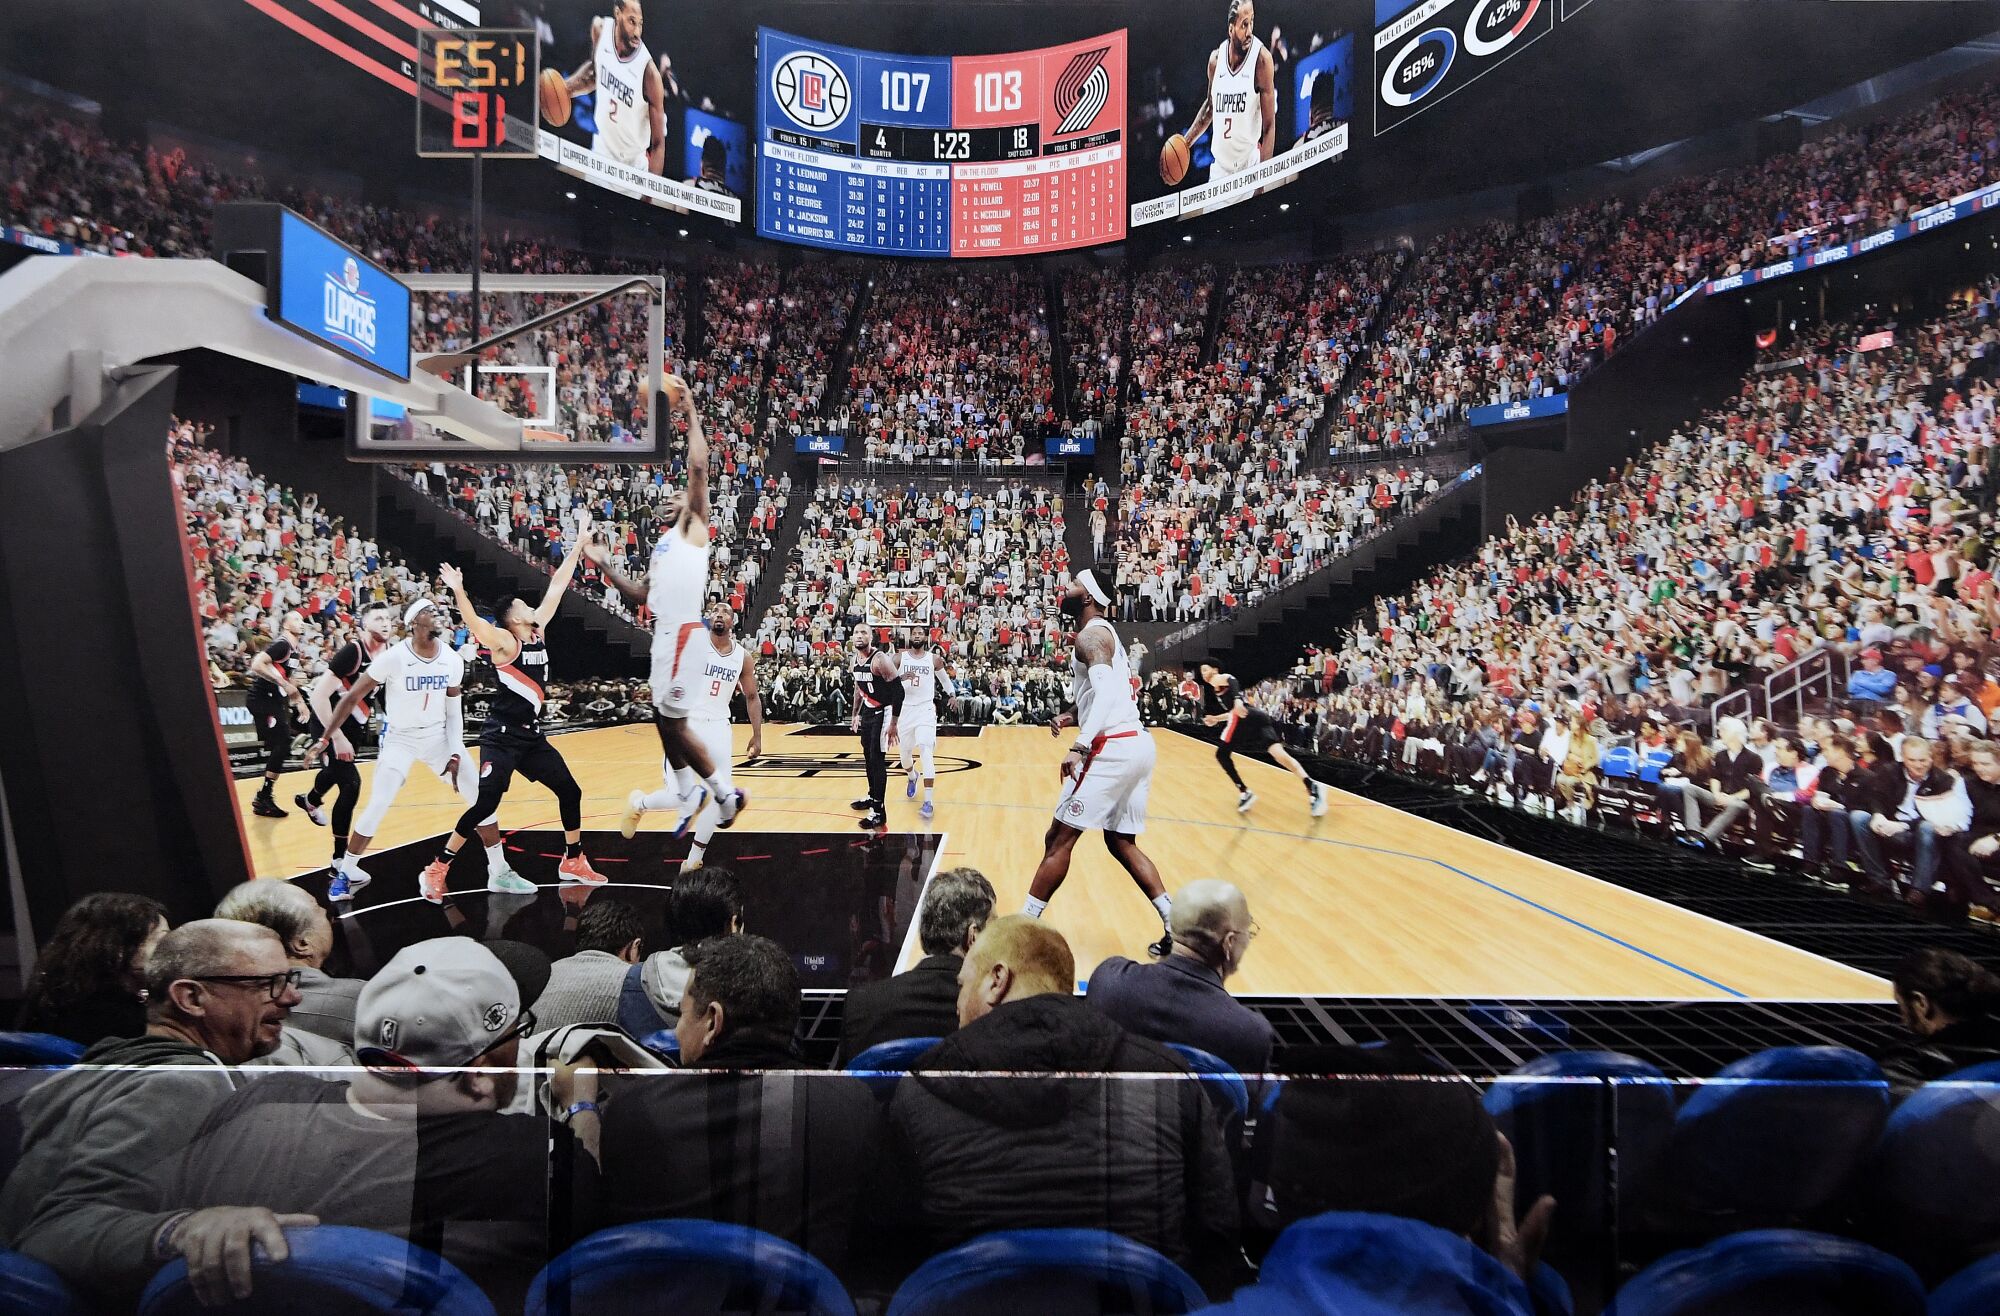 A rendering of a game being played in The Intuit Dome, the future home of the Clippers.